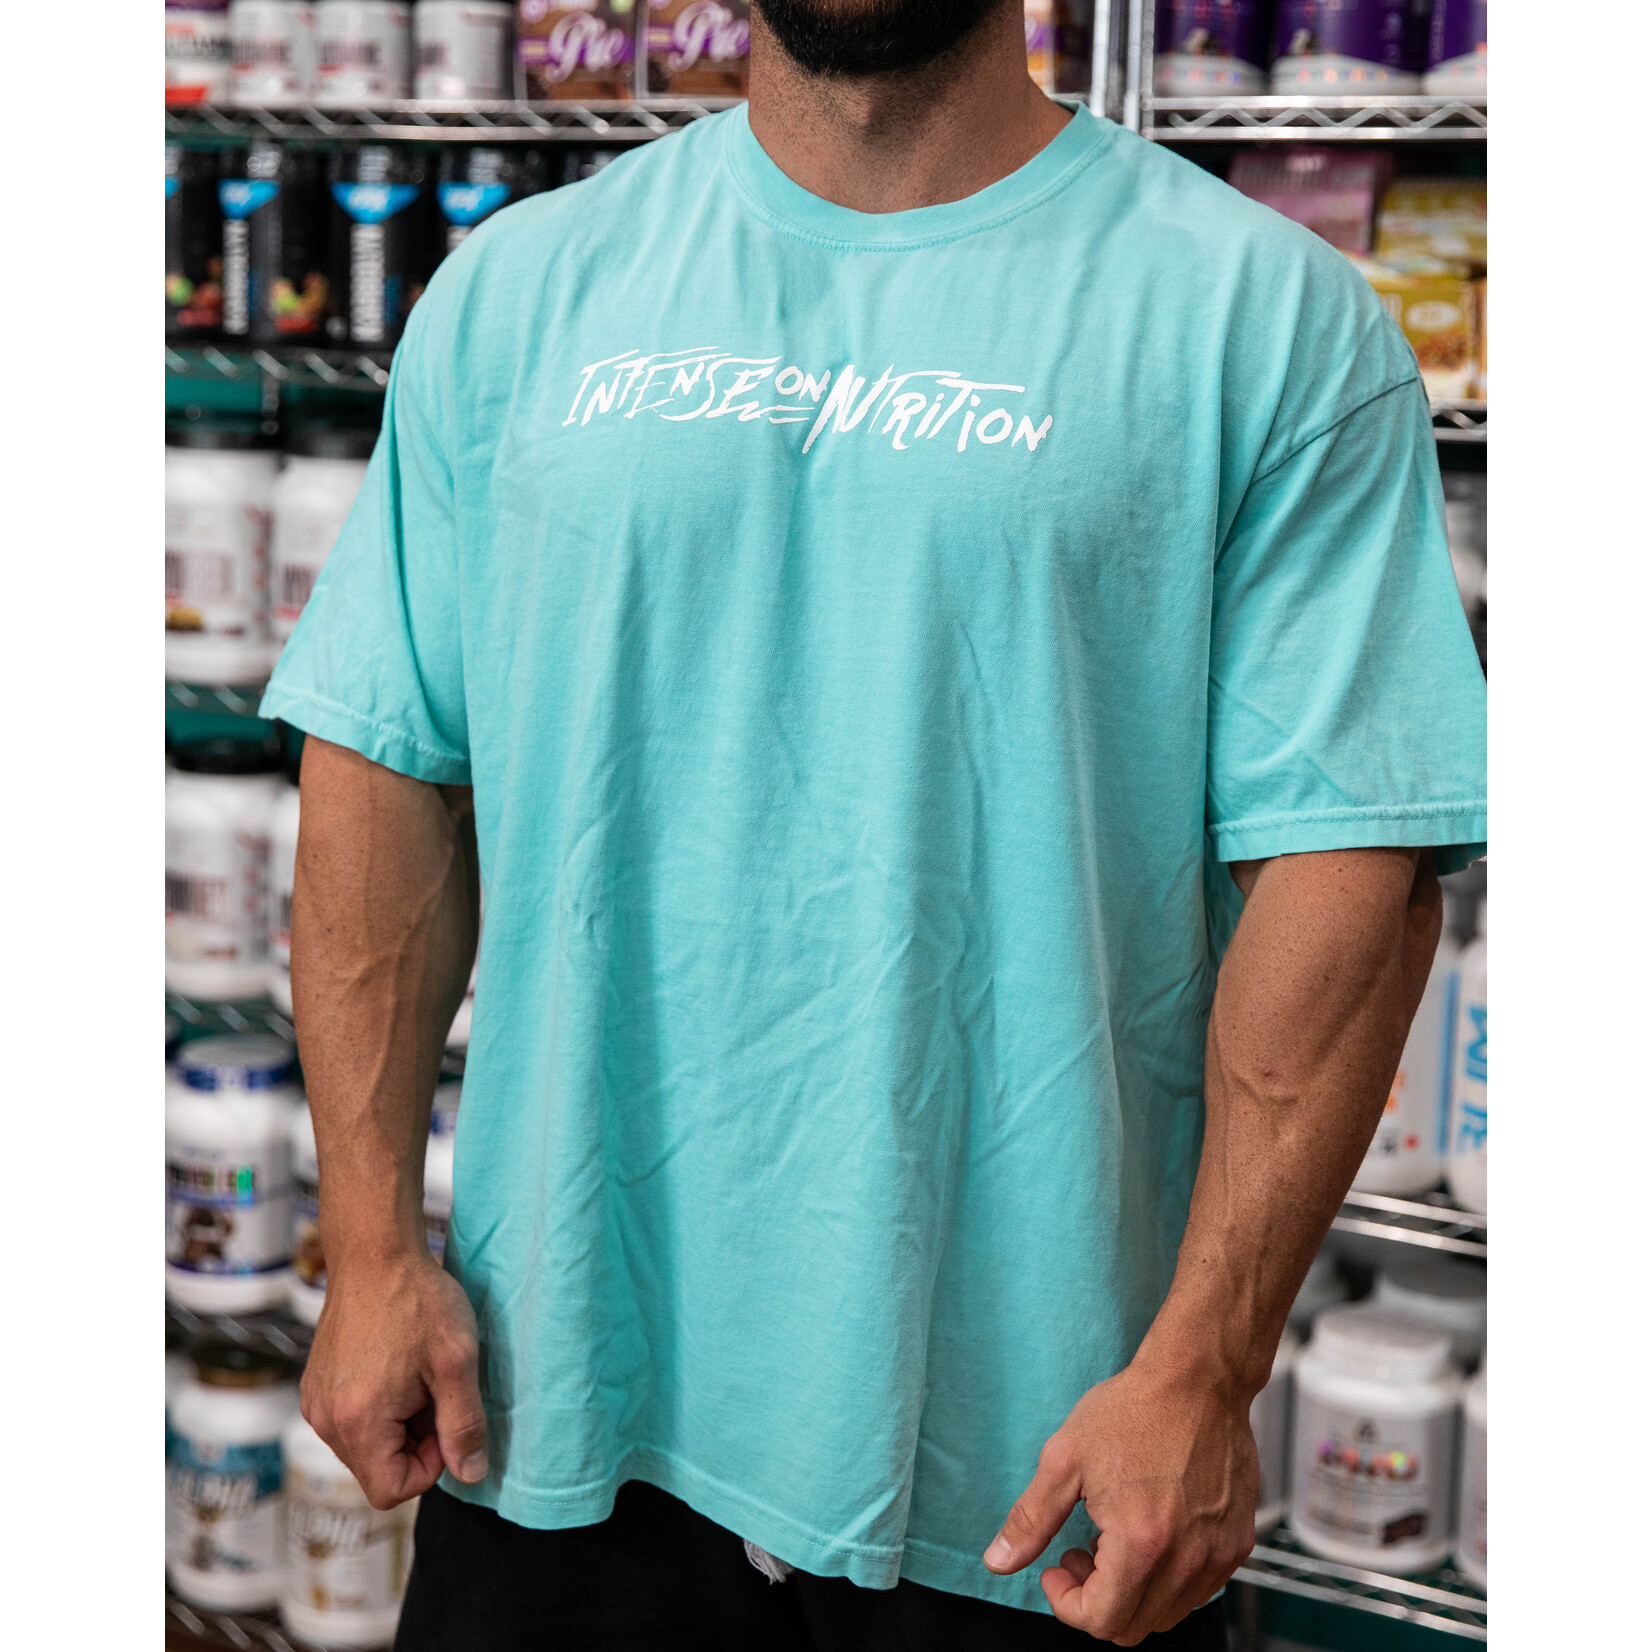 Philly Gainz Intense On Nutrition Tee